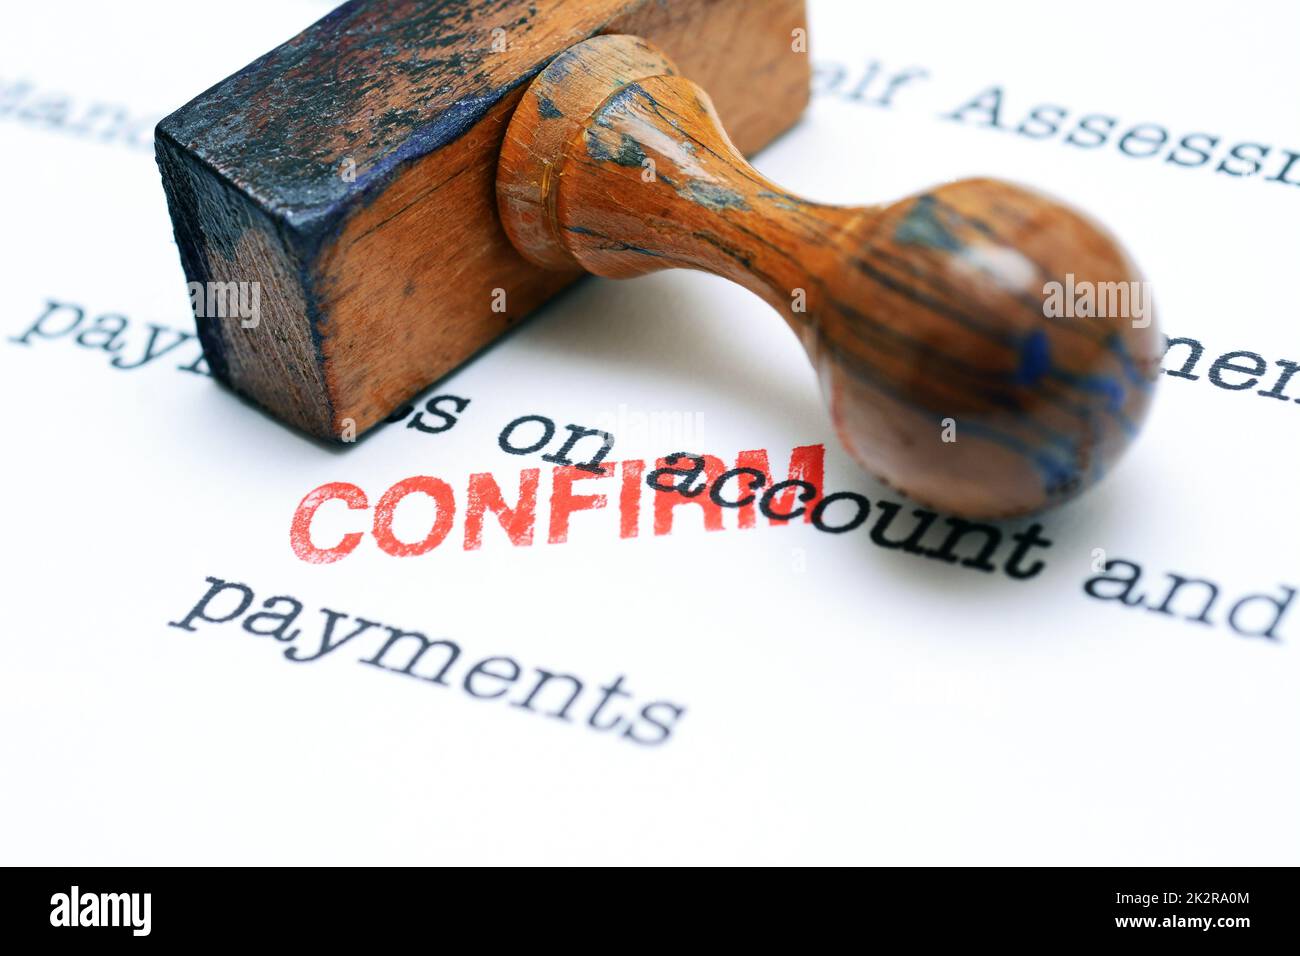 Payments confirm Stock Photo